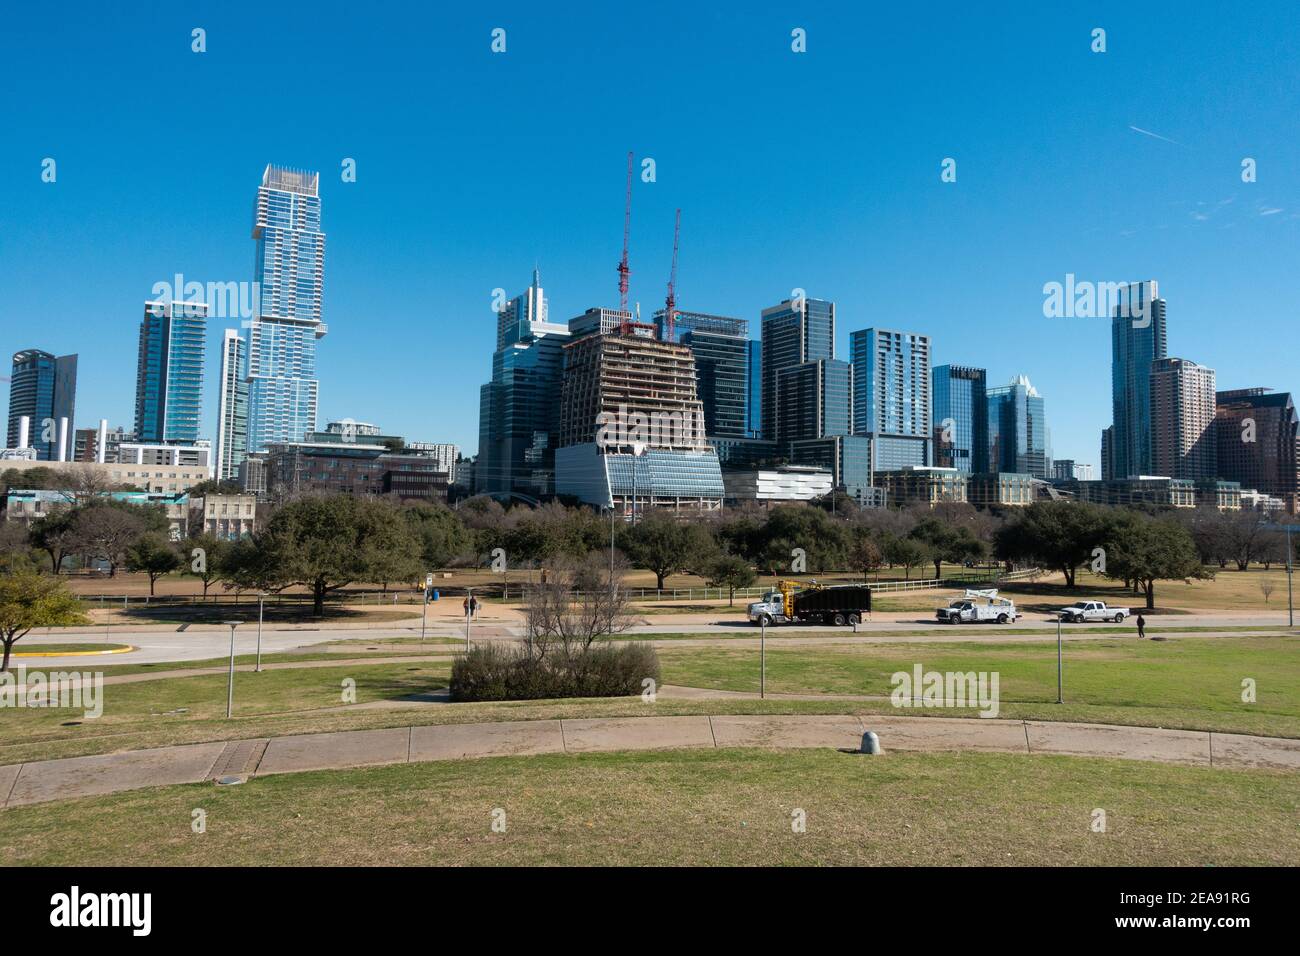 Austin Texas downtown skyline with park in foreground Stock Photo